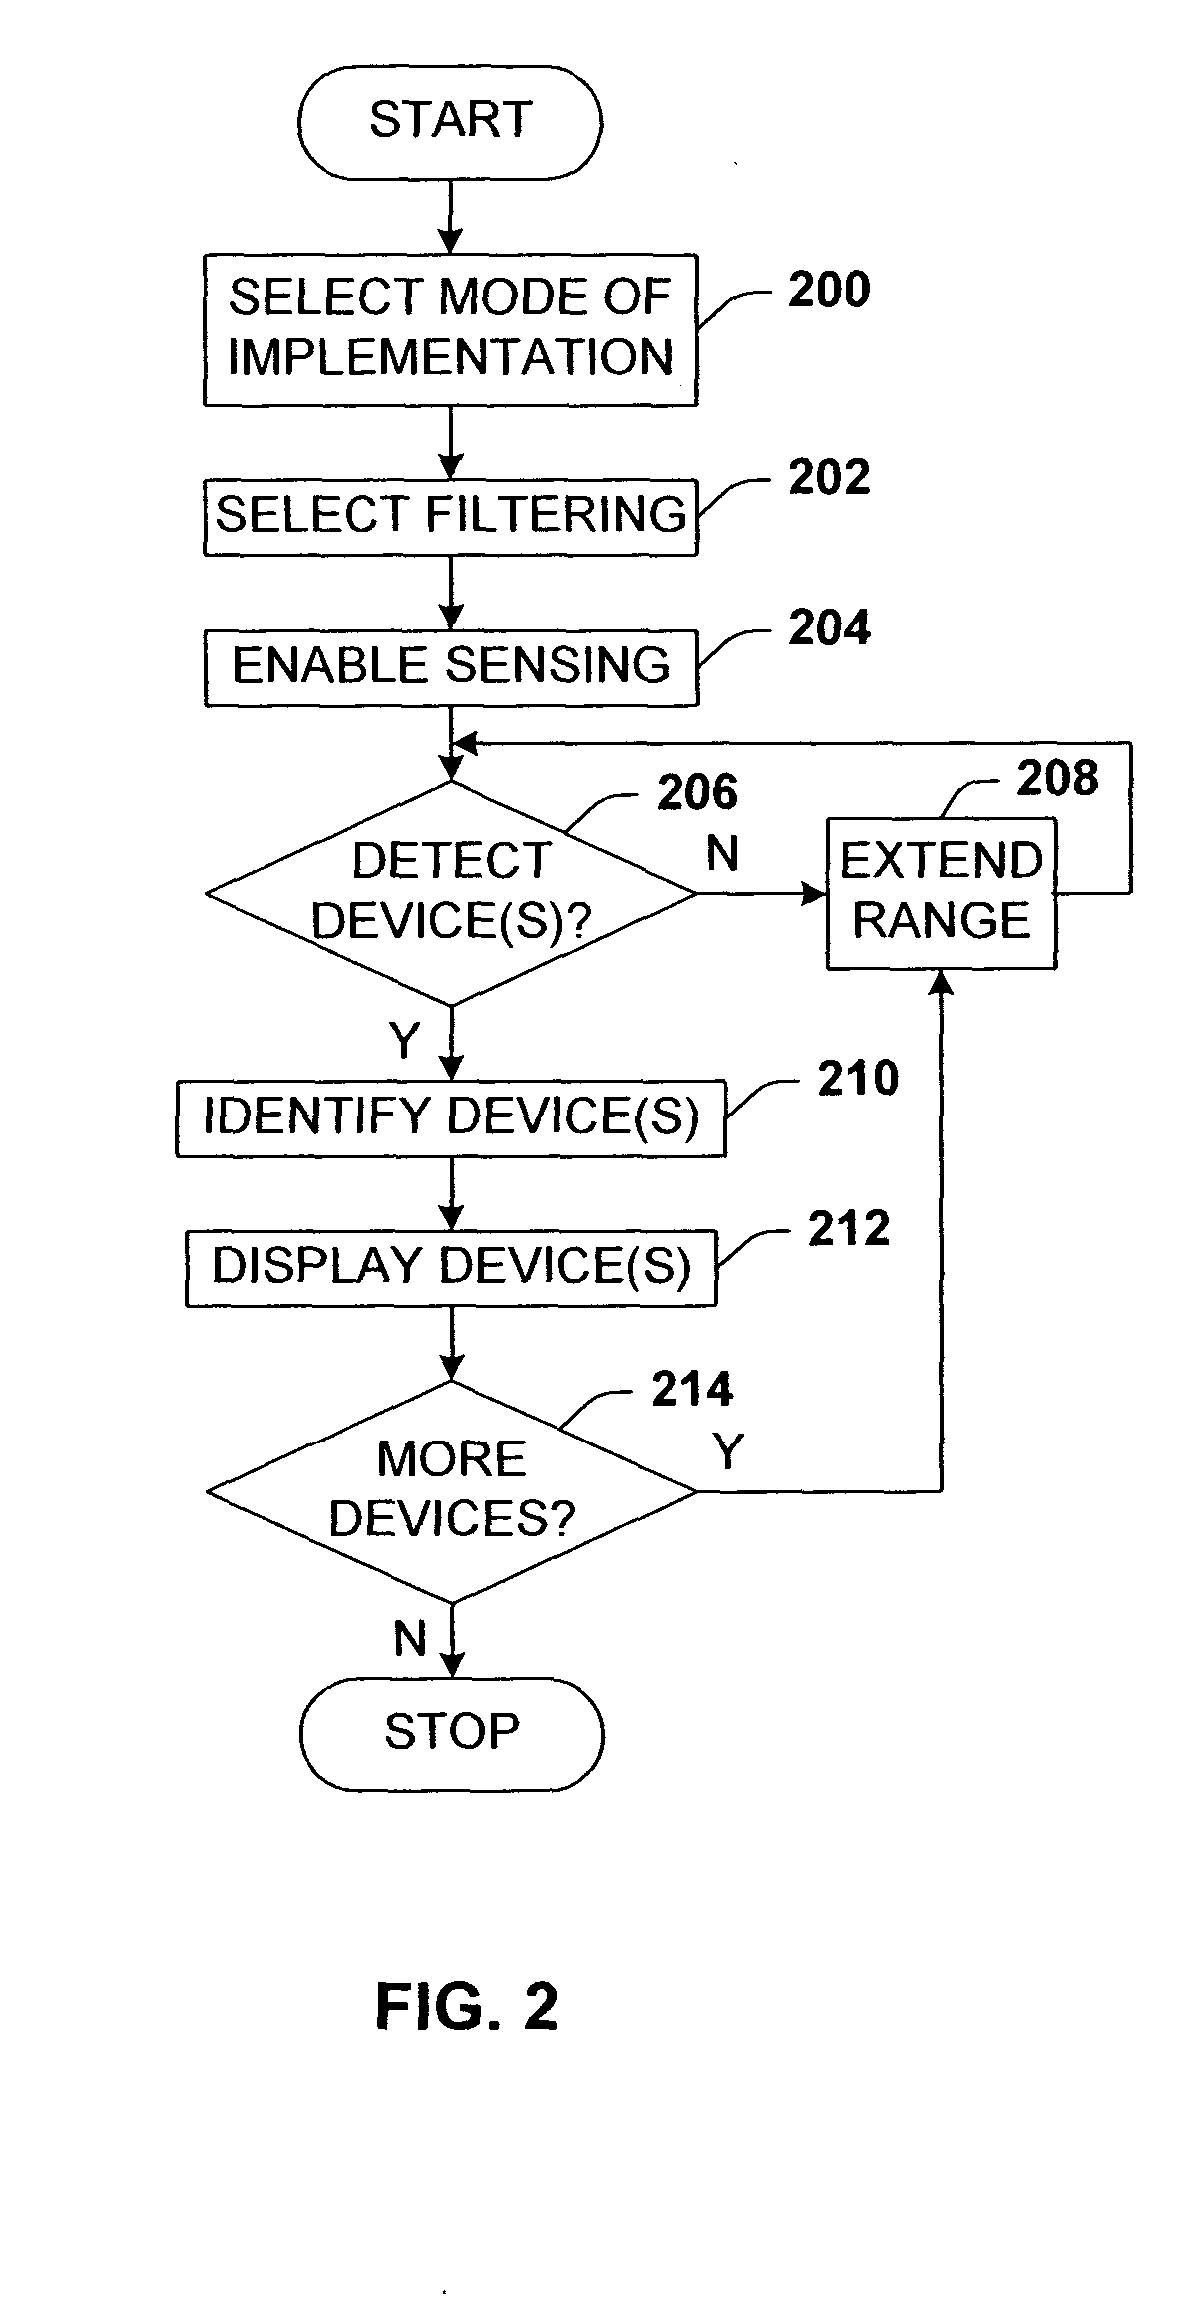 Multi-dimensional graphical display of discovered wireless devices